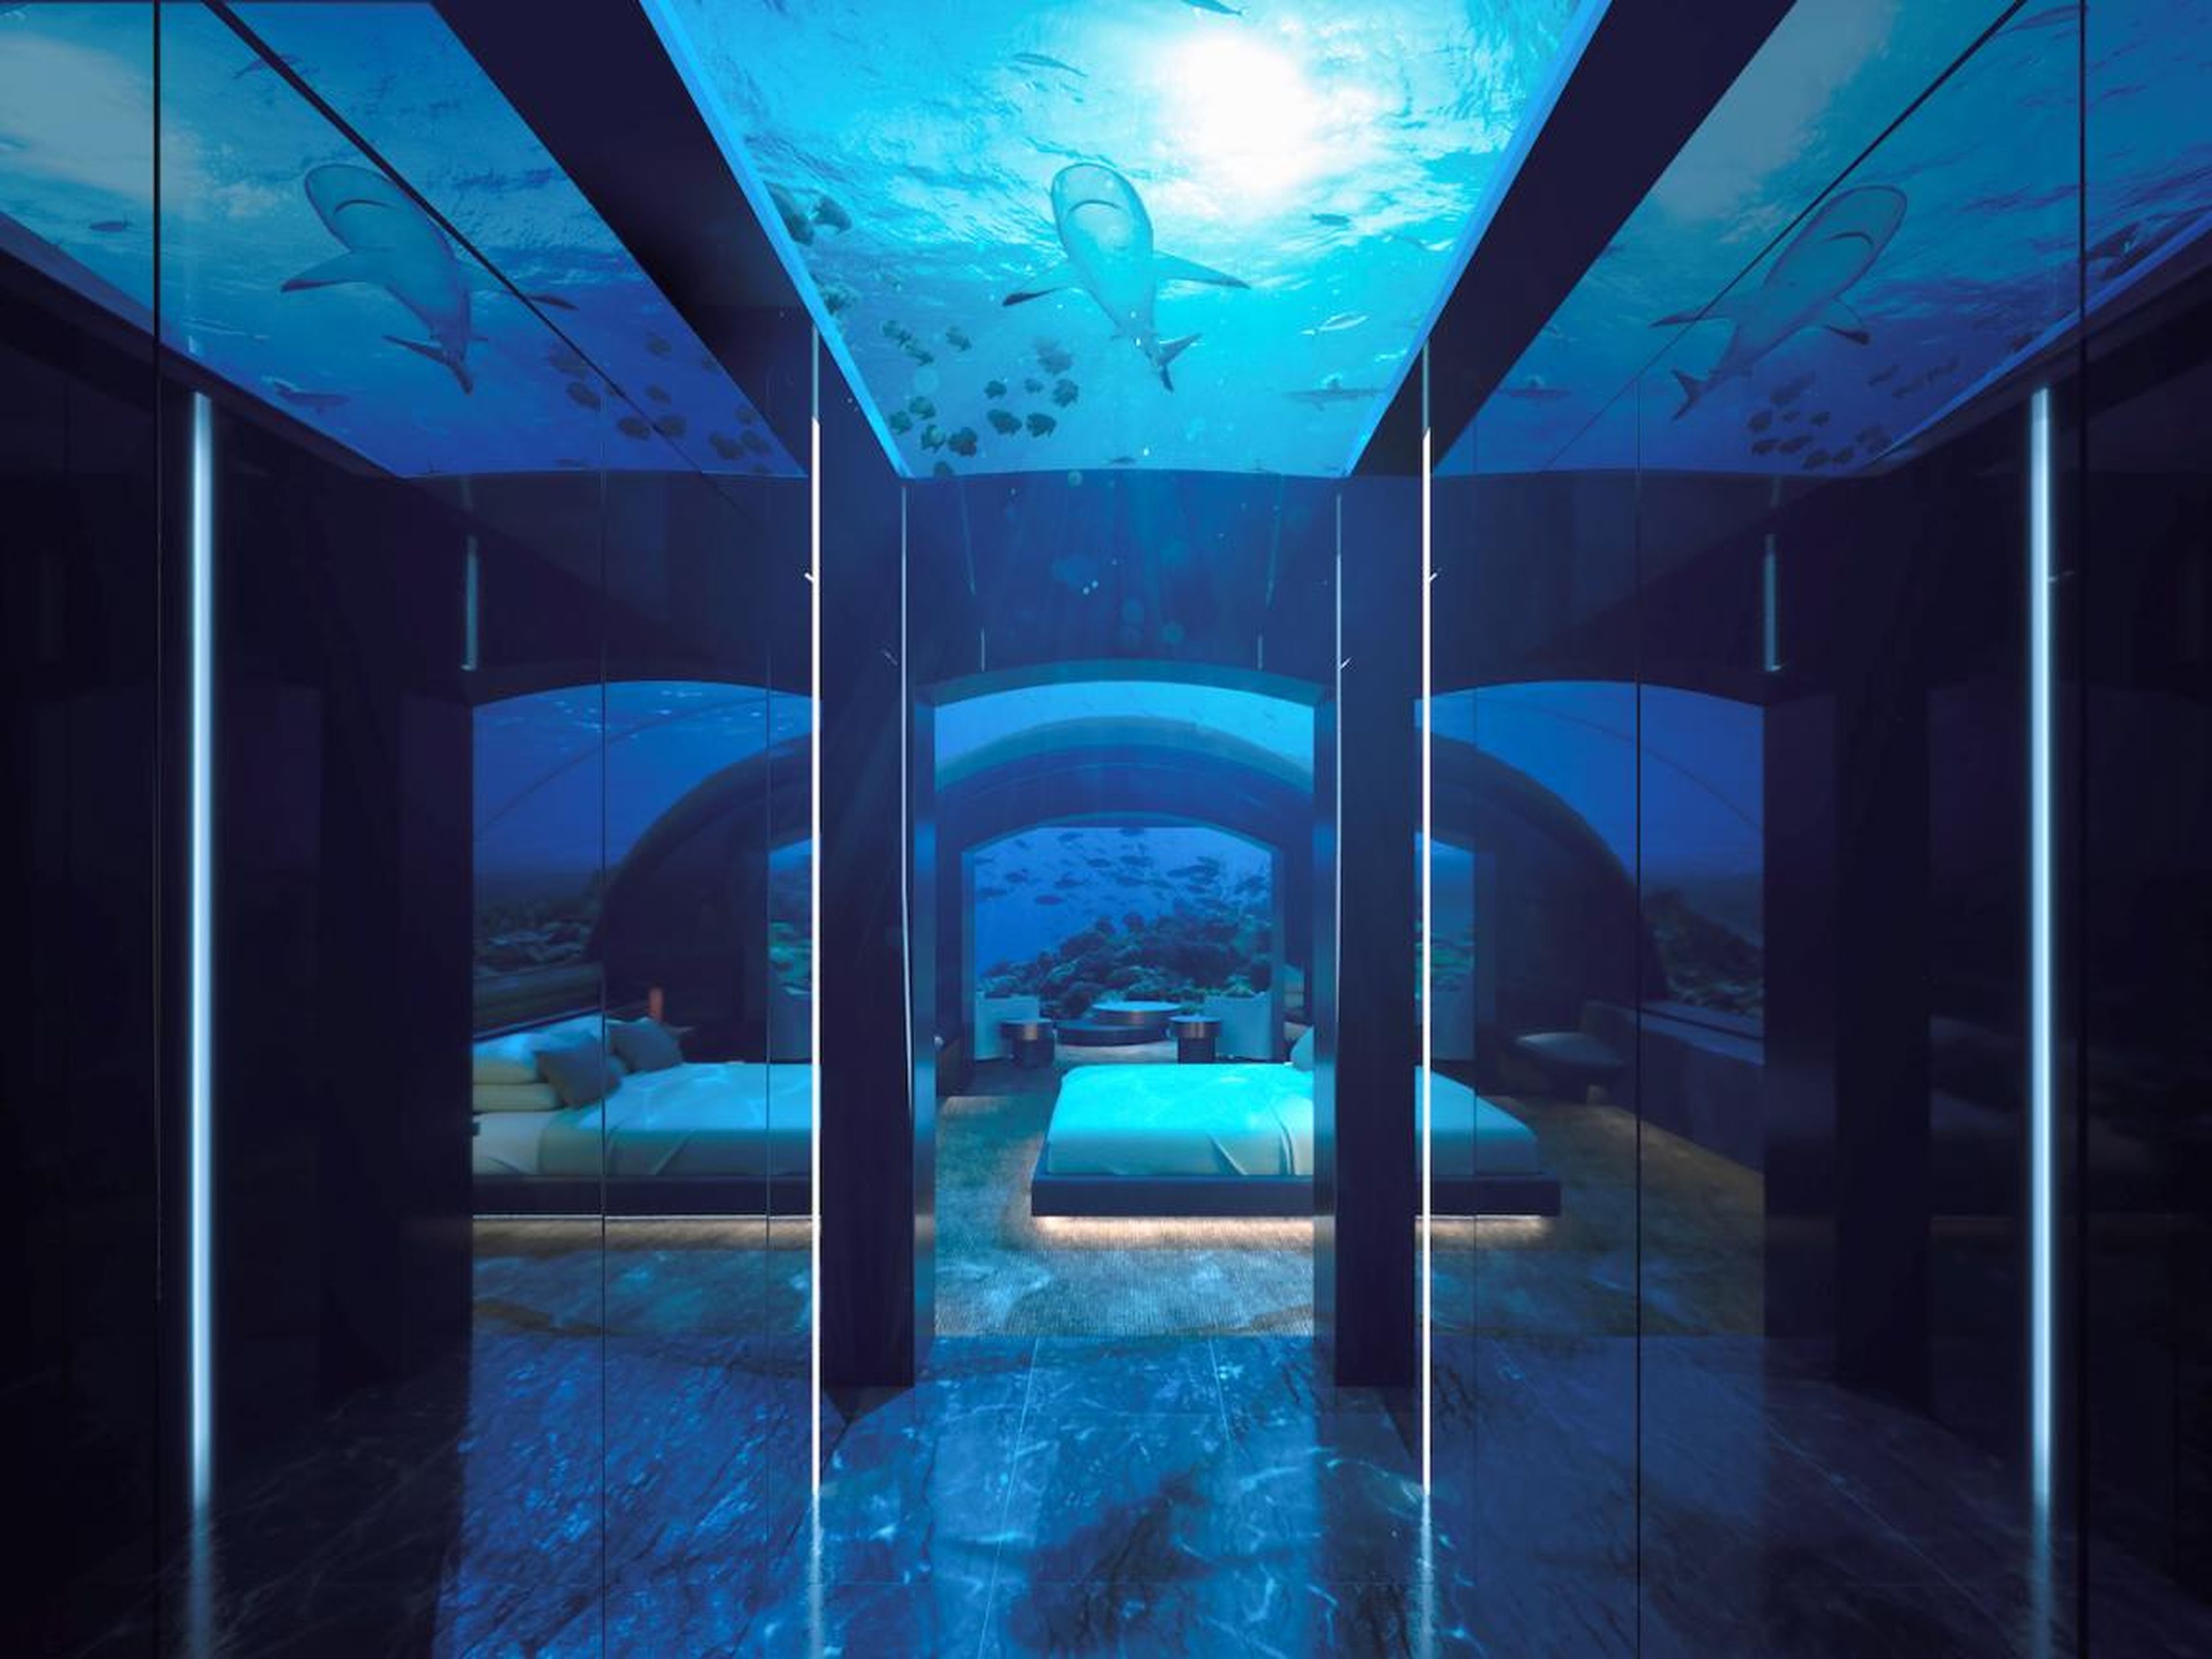 Guests can make their way down below the waves via a spiral staircase or elevator. A domed ceiling and expansive windows offer panoramic views of the deep blue.